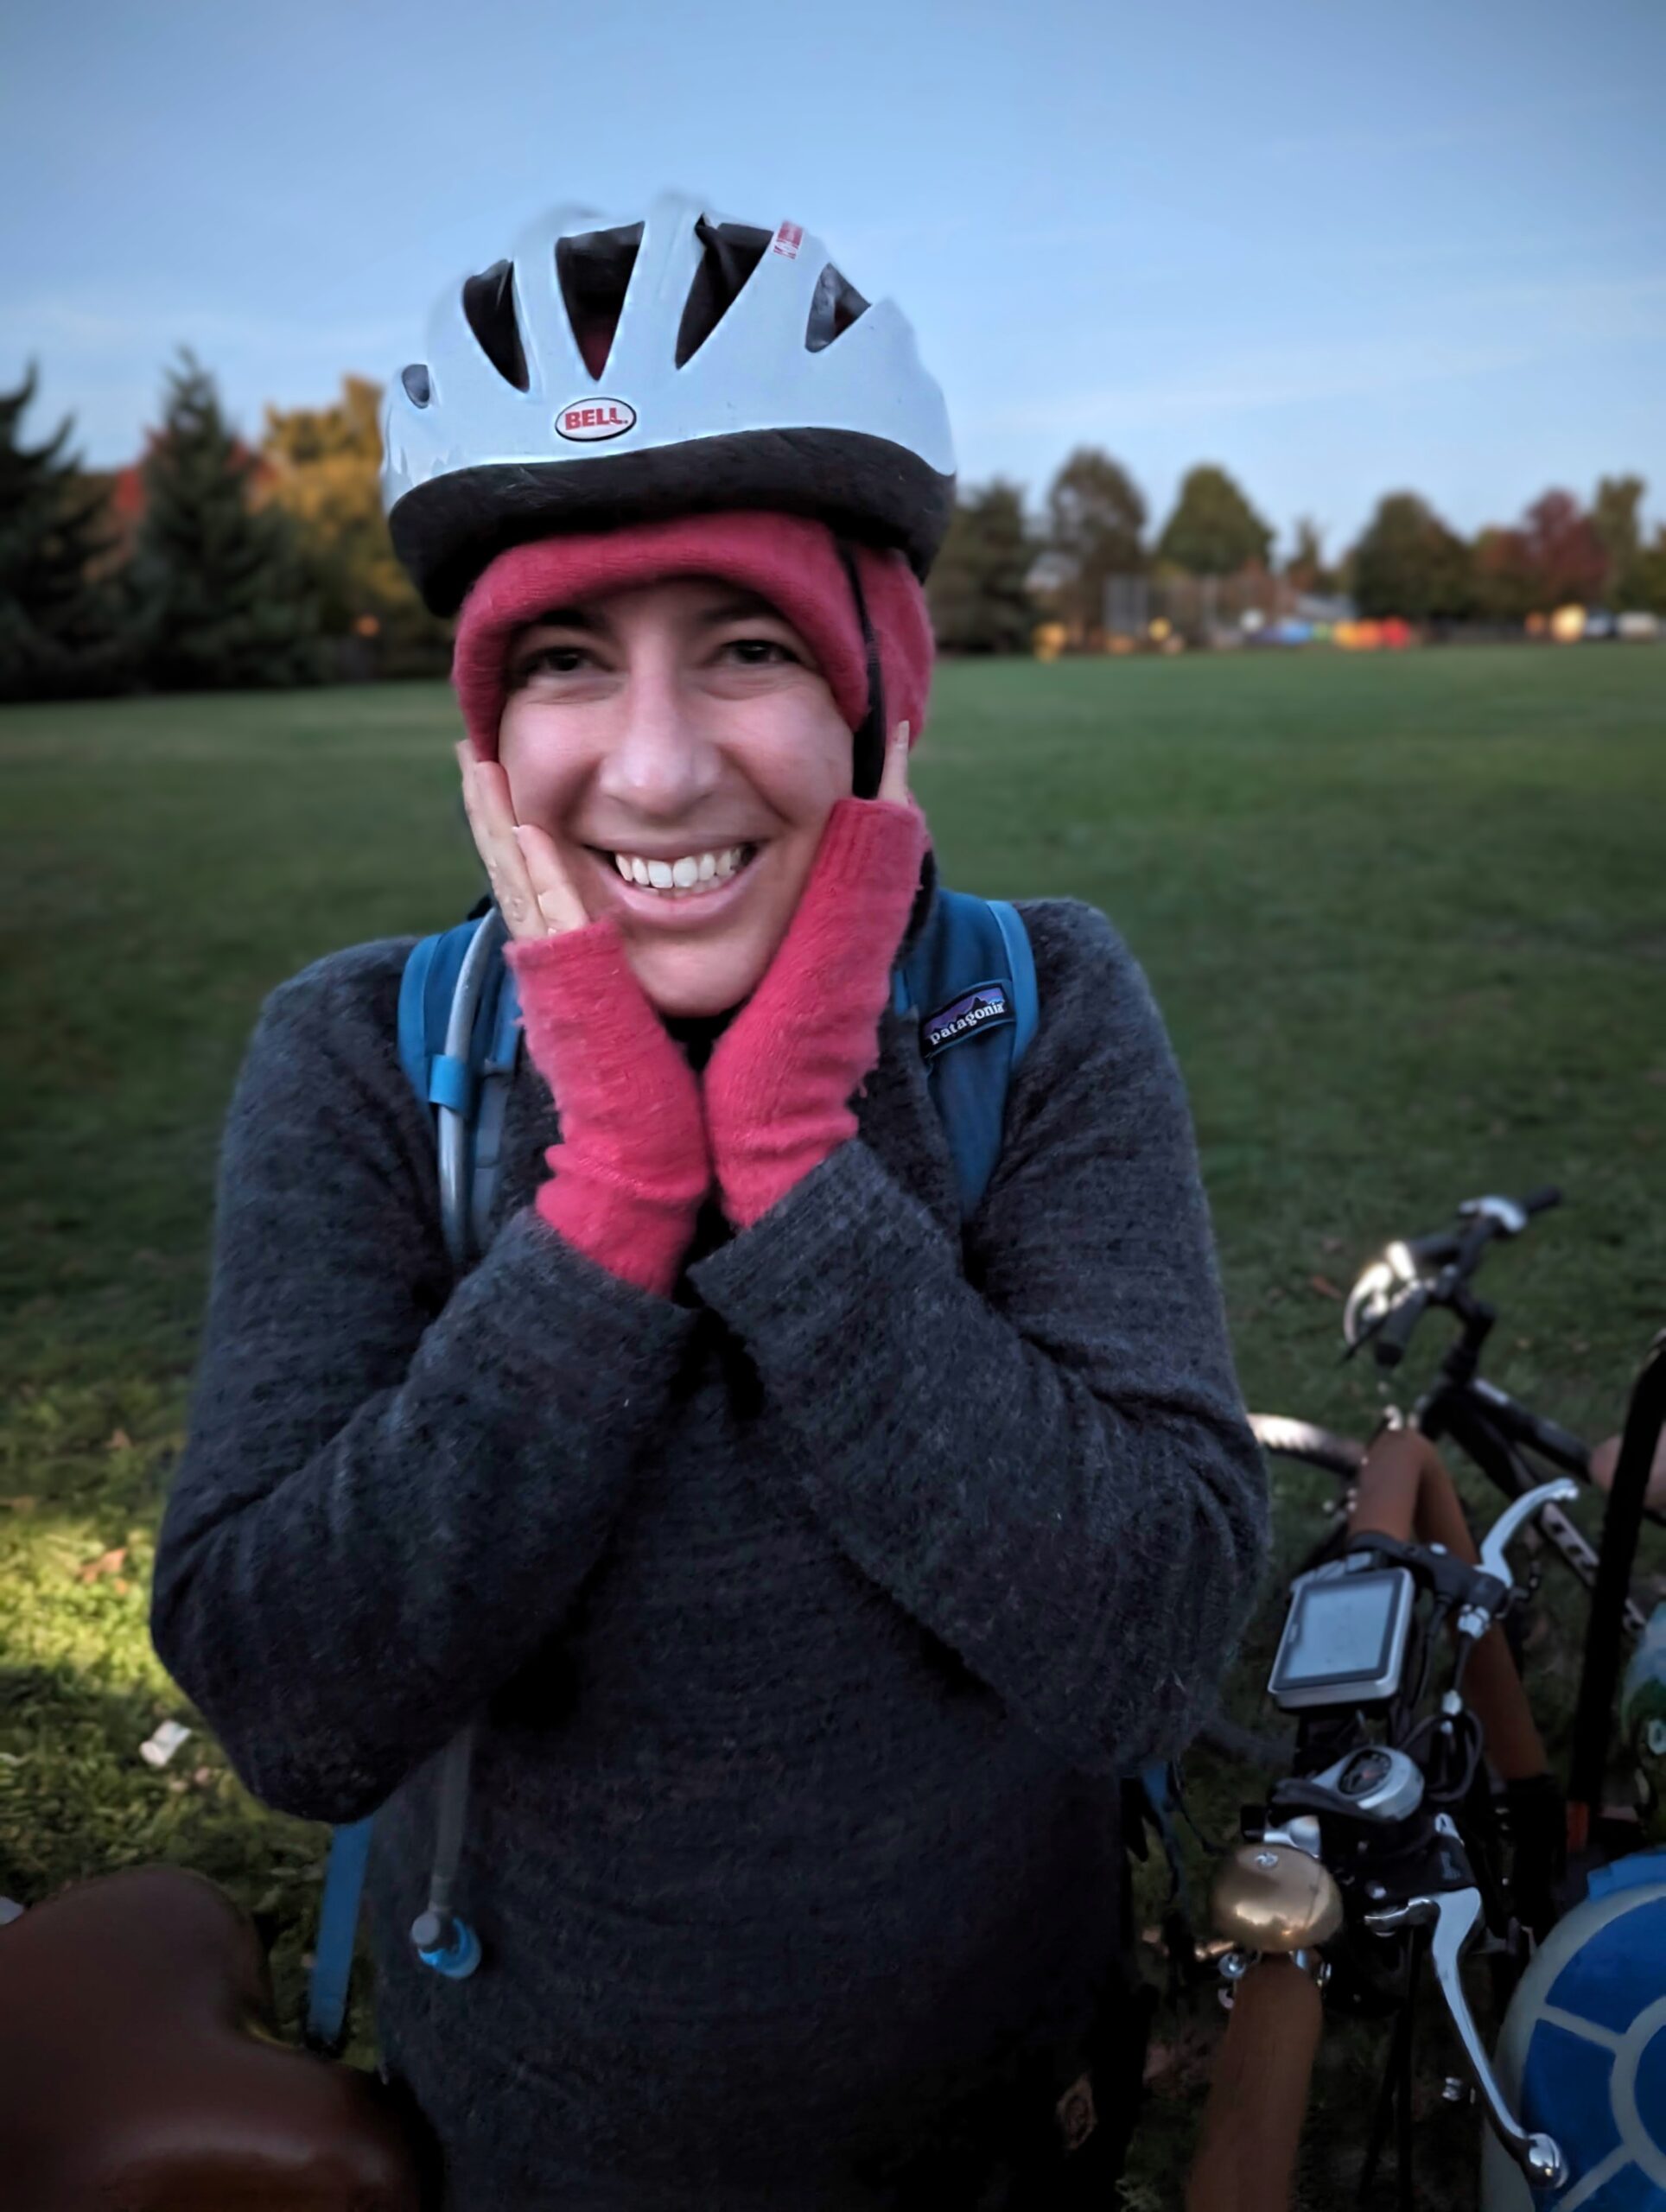 Keep it waterproof: A guide to getting more out of your gear – BikePortland